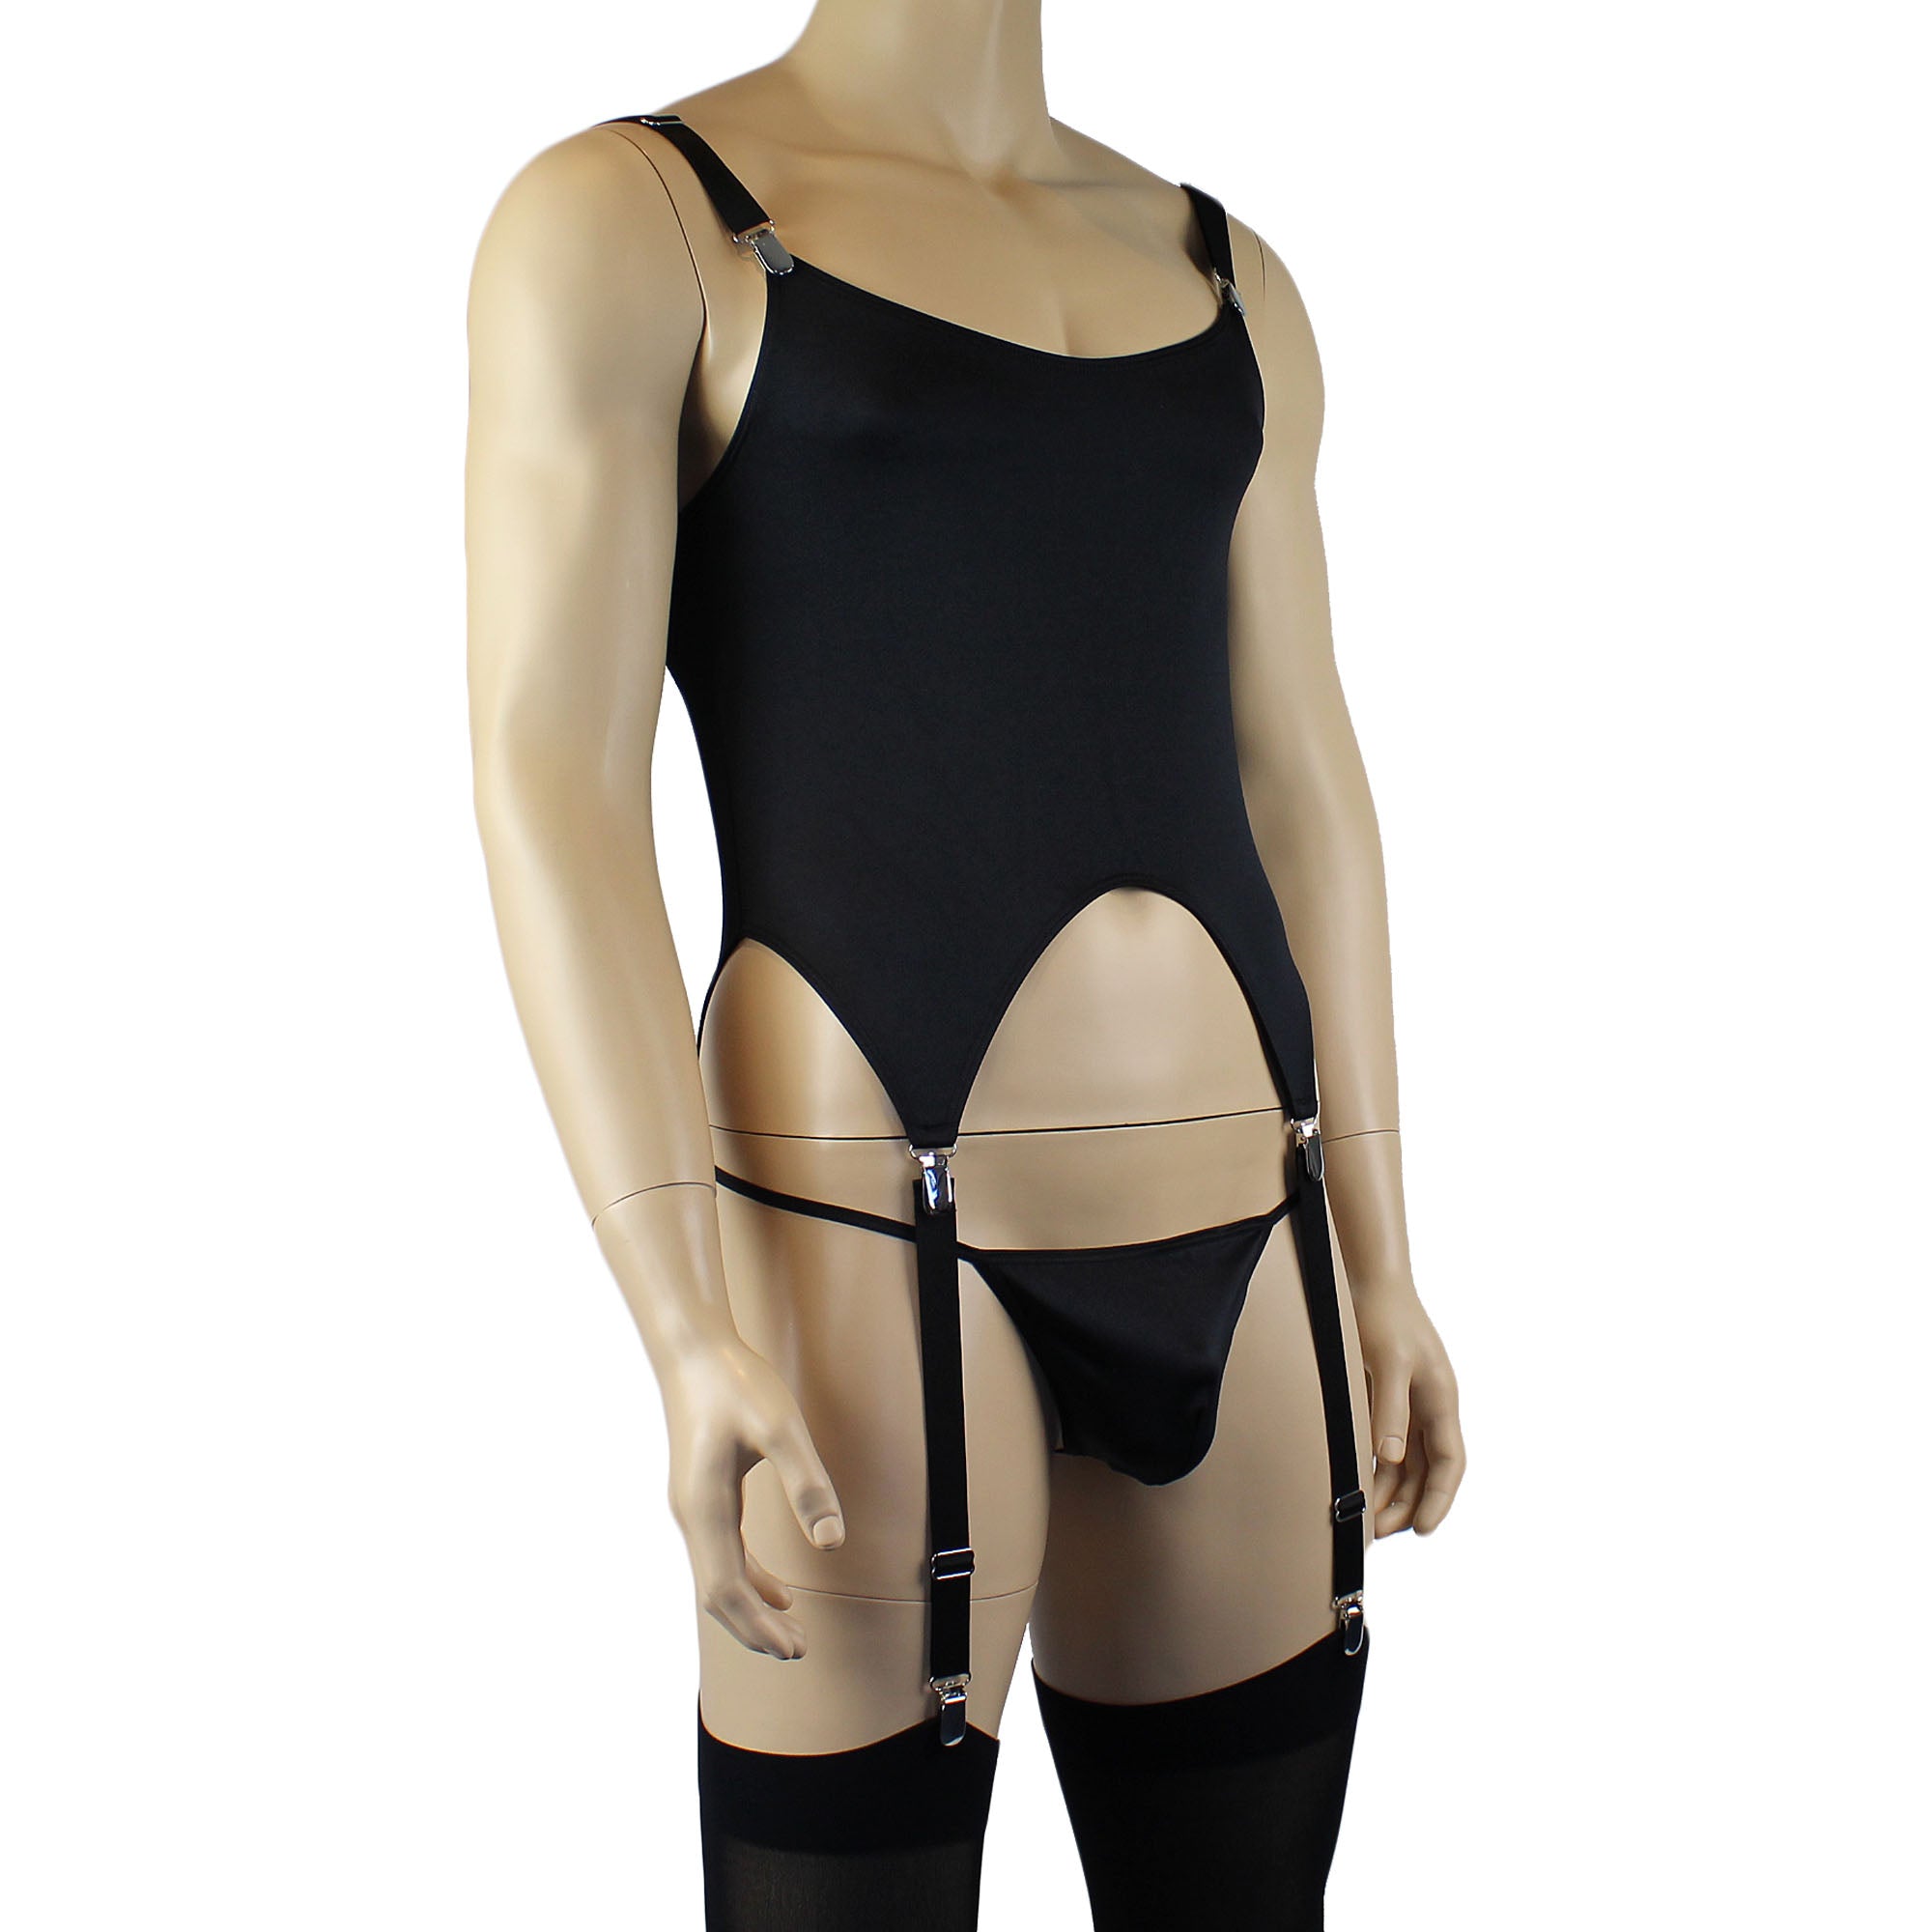 Mens Janice Corset Top with Metal Clips & Attached Garters - Sizes up to 3XL